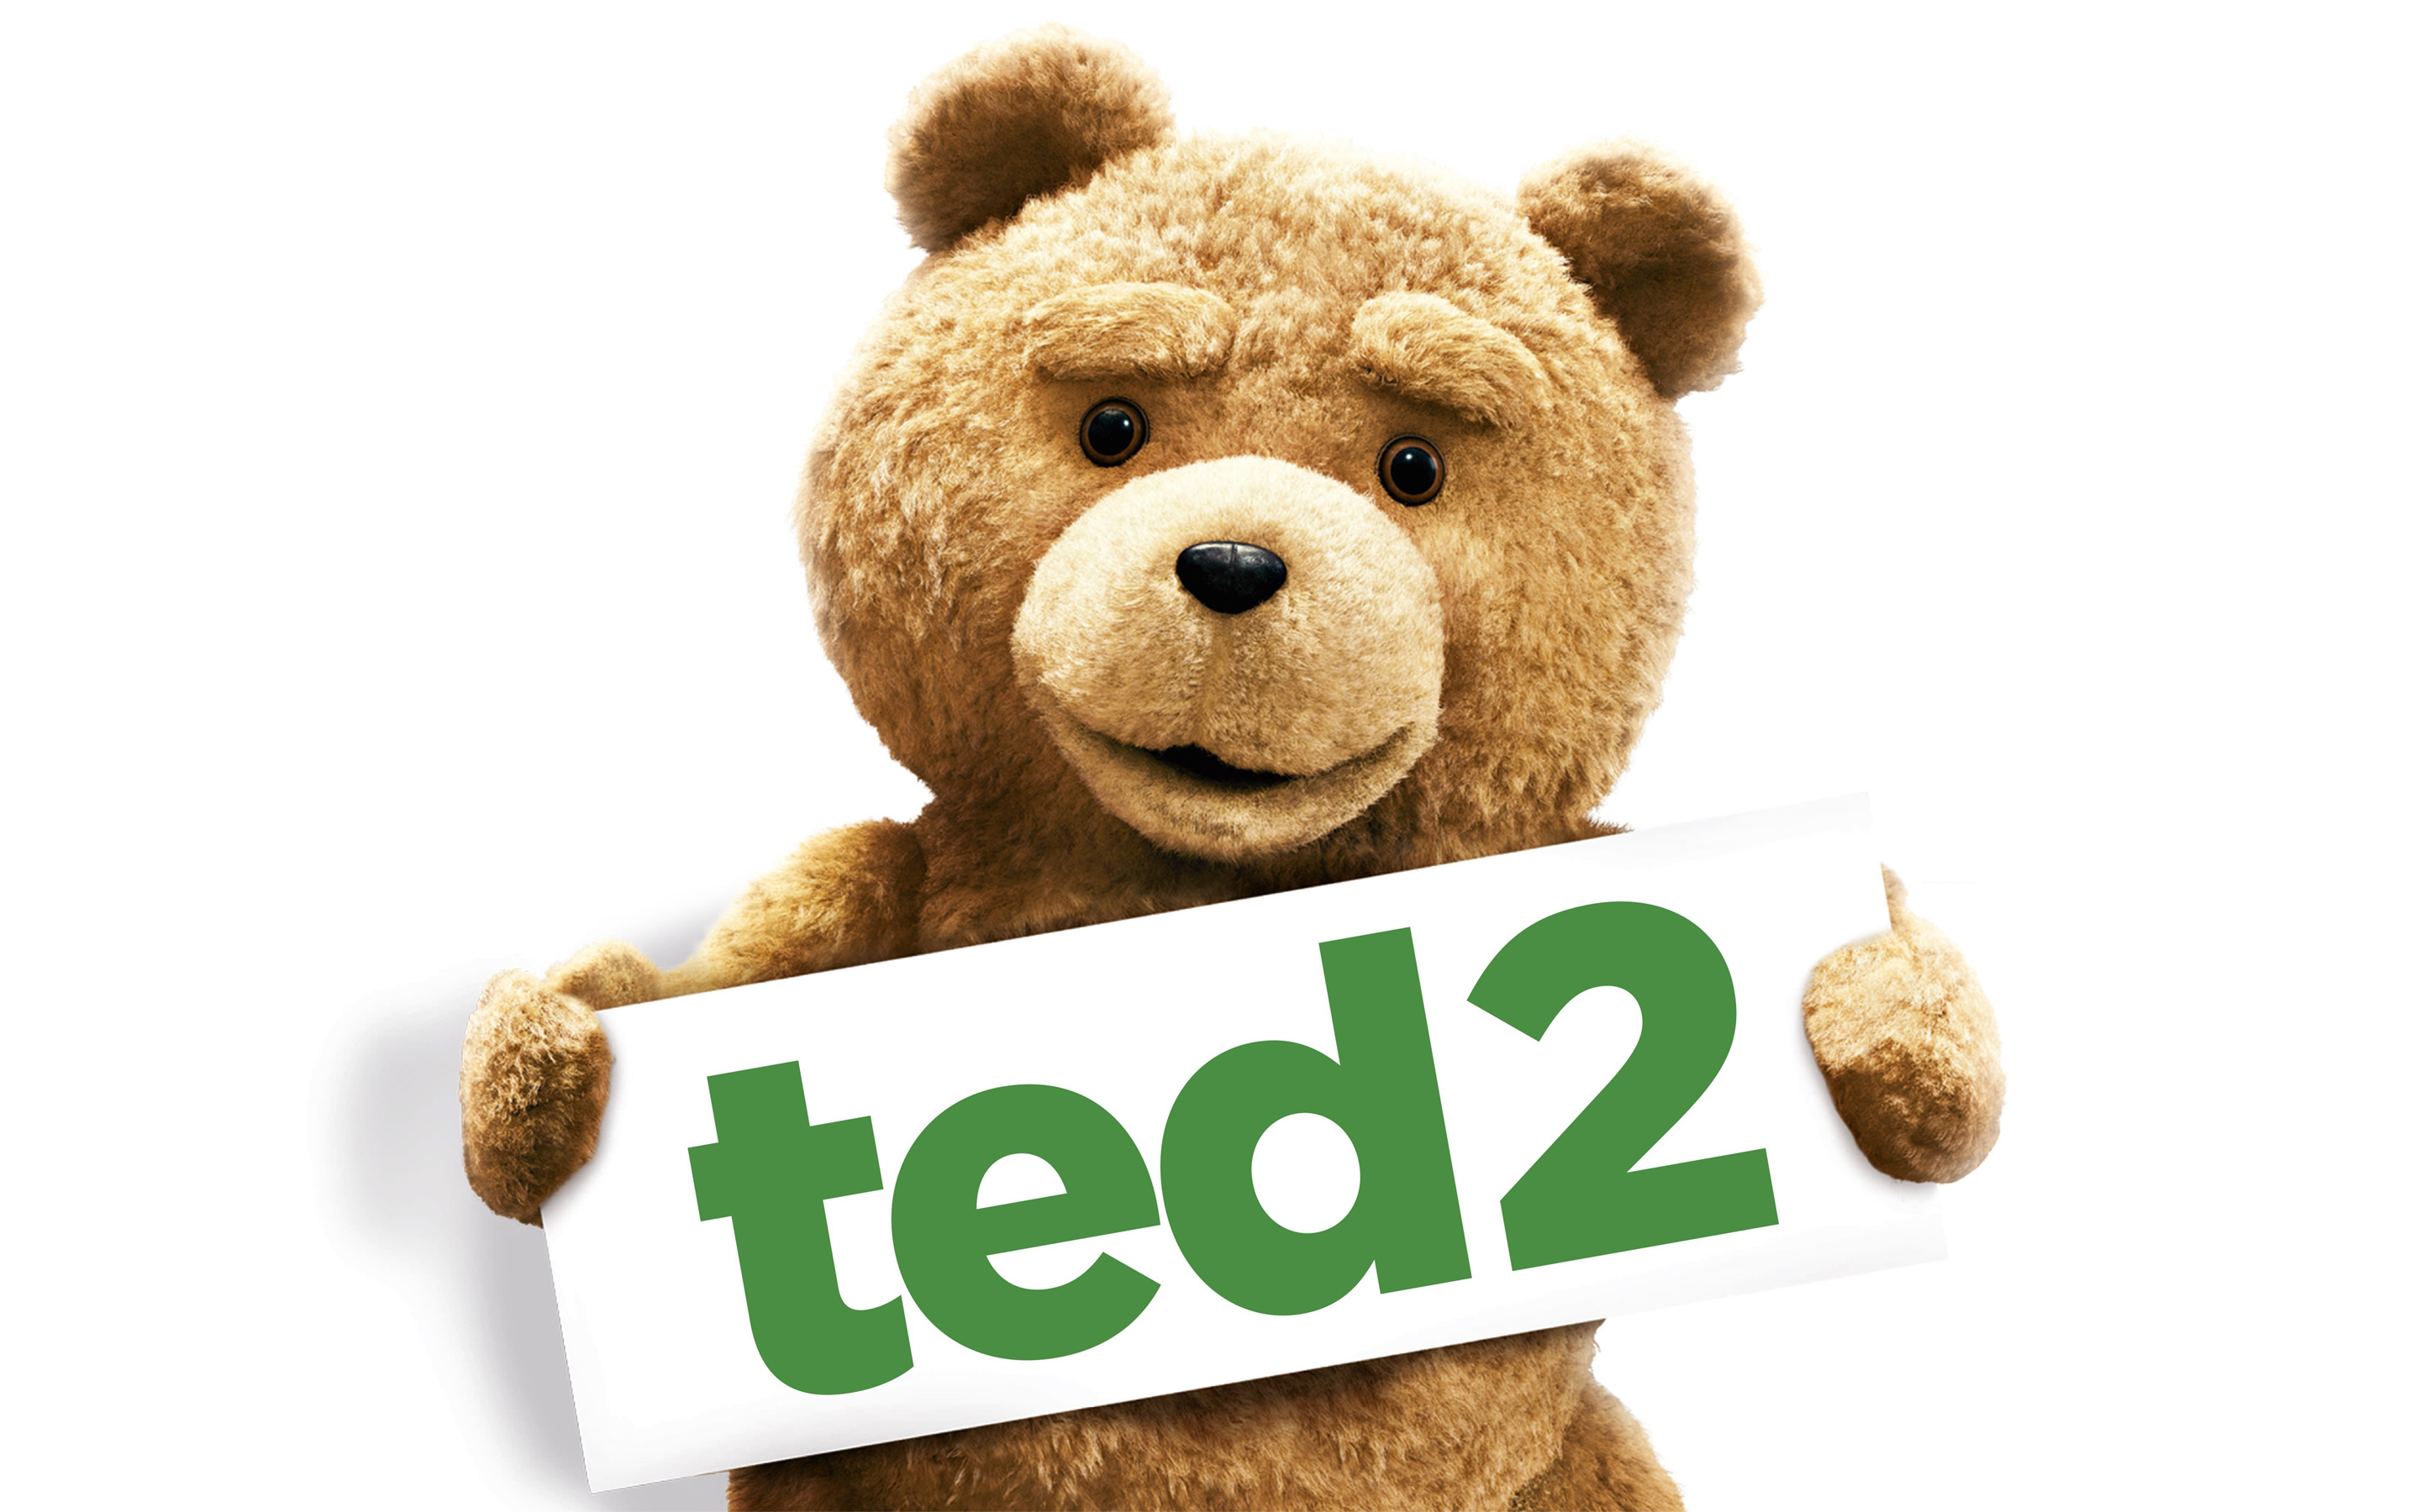 Ted 2 Wallpapers